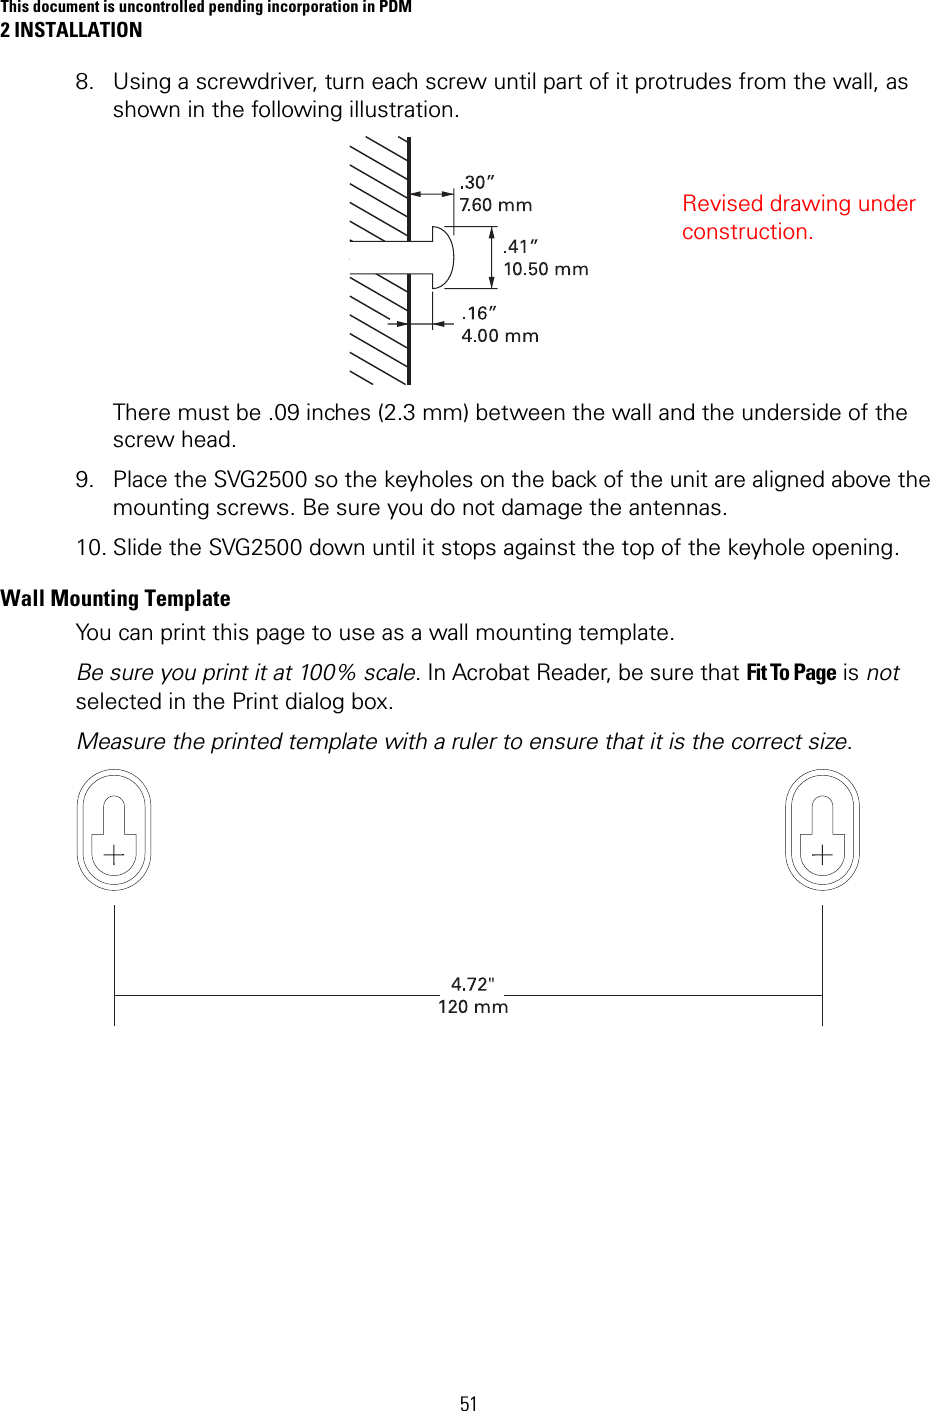 This document is uncontrolled pending incorporation in PDM 2 INSTALLATION  51 8. Using a screwdriver, turn each screw until part of it protrudes from the wall, as shown in the following illustration.  There must be .09 inches (2.3 mm) between the wall and the underside of the screw head. 9. Place the SVG2500 so the keyholes on the back of the unit are aligned above the mounting screws. Be sure you do not damage the antennas.  10. Slide the SVG2500 down until it stops against the top of the keyhole opening. Wall Mounting Template You can print this page to use as a wall mounting template. Be sure you print it at 100% scale. In Acrobat Reader, be sure that Fit To Page is not selected in the Print dialog box. Measure the printed template with a ruler to ensure that it is the correct size.   Revised drawing under construction. 